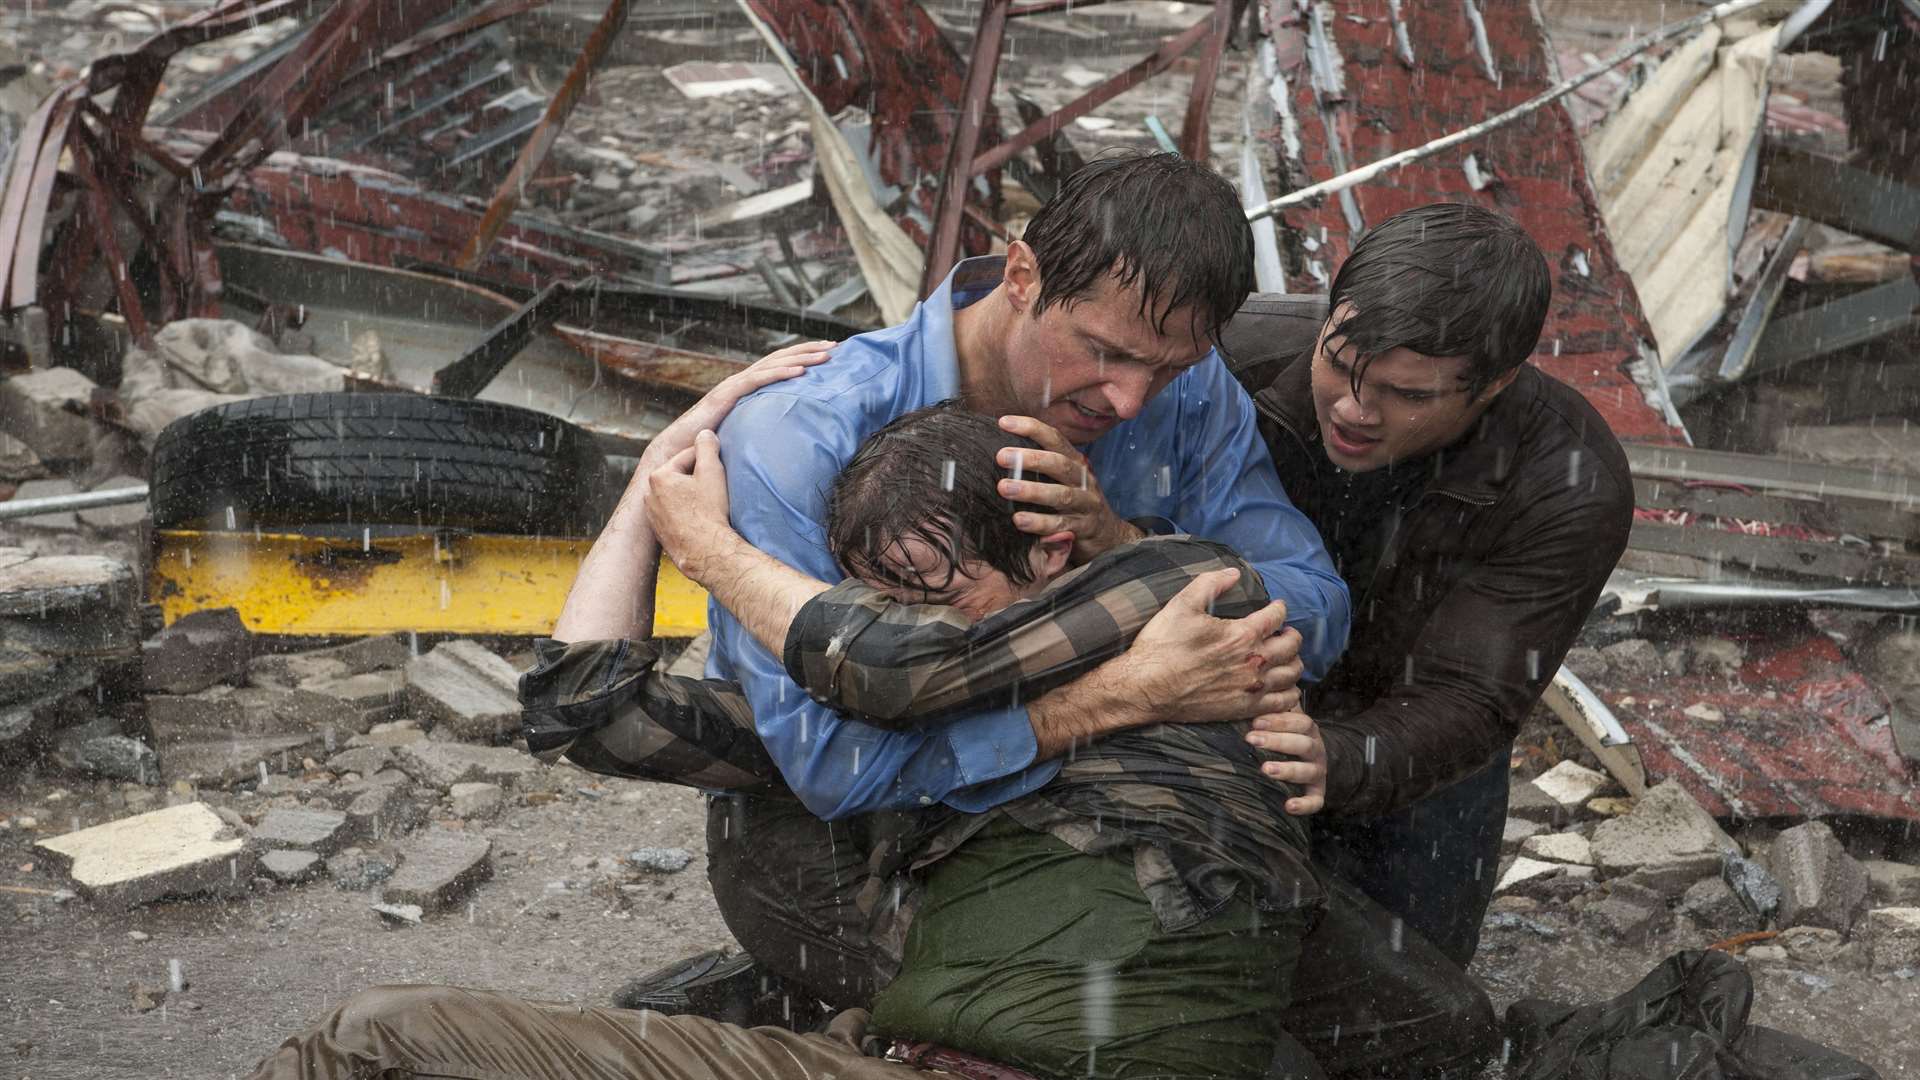 Into The Storm, with Max Deacon as Donnie, Richard Armiage as Gary and Nathan Kress as Trey. Picture: PA Photo/Warner Brothers